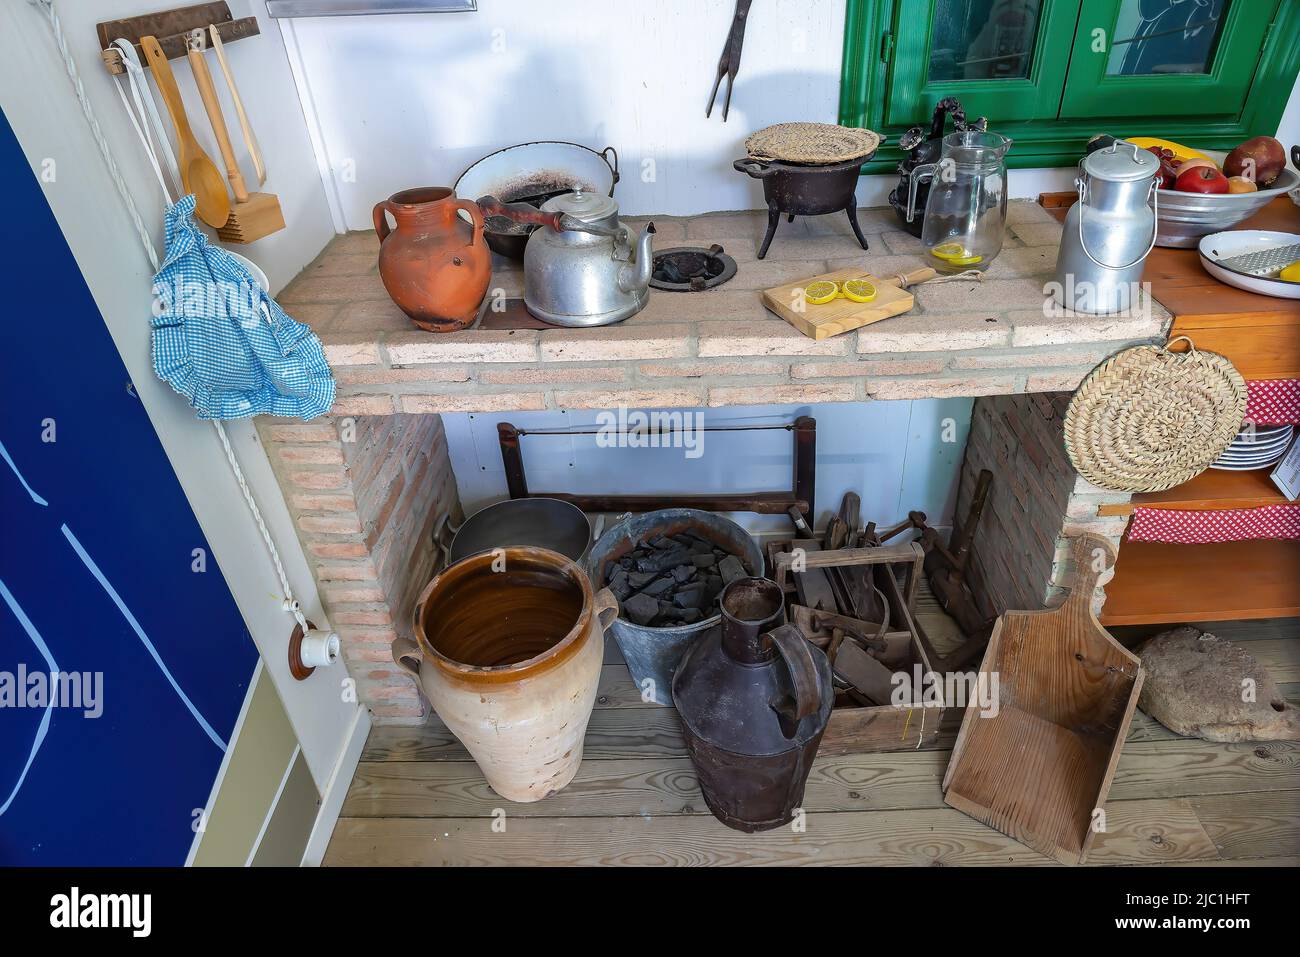 Old kitchenware utensils on an old kitchen of a country house Stock Photo -  Alamy